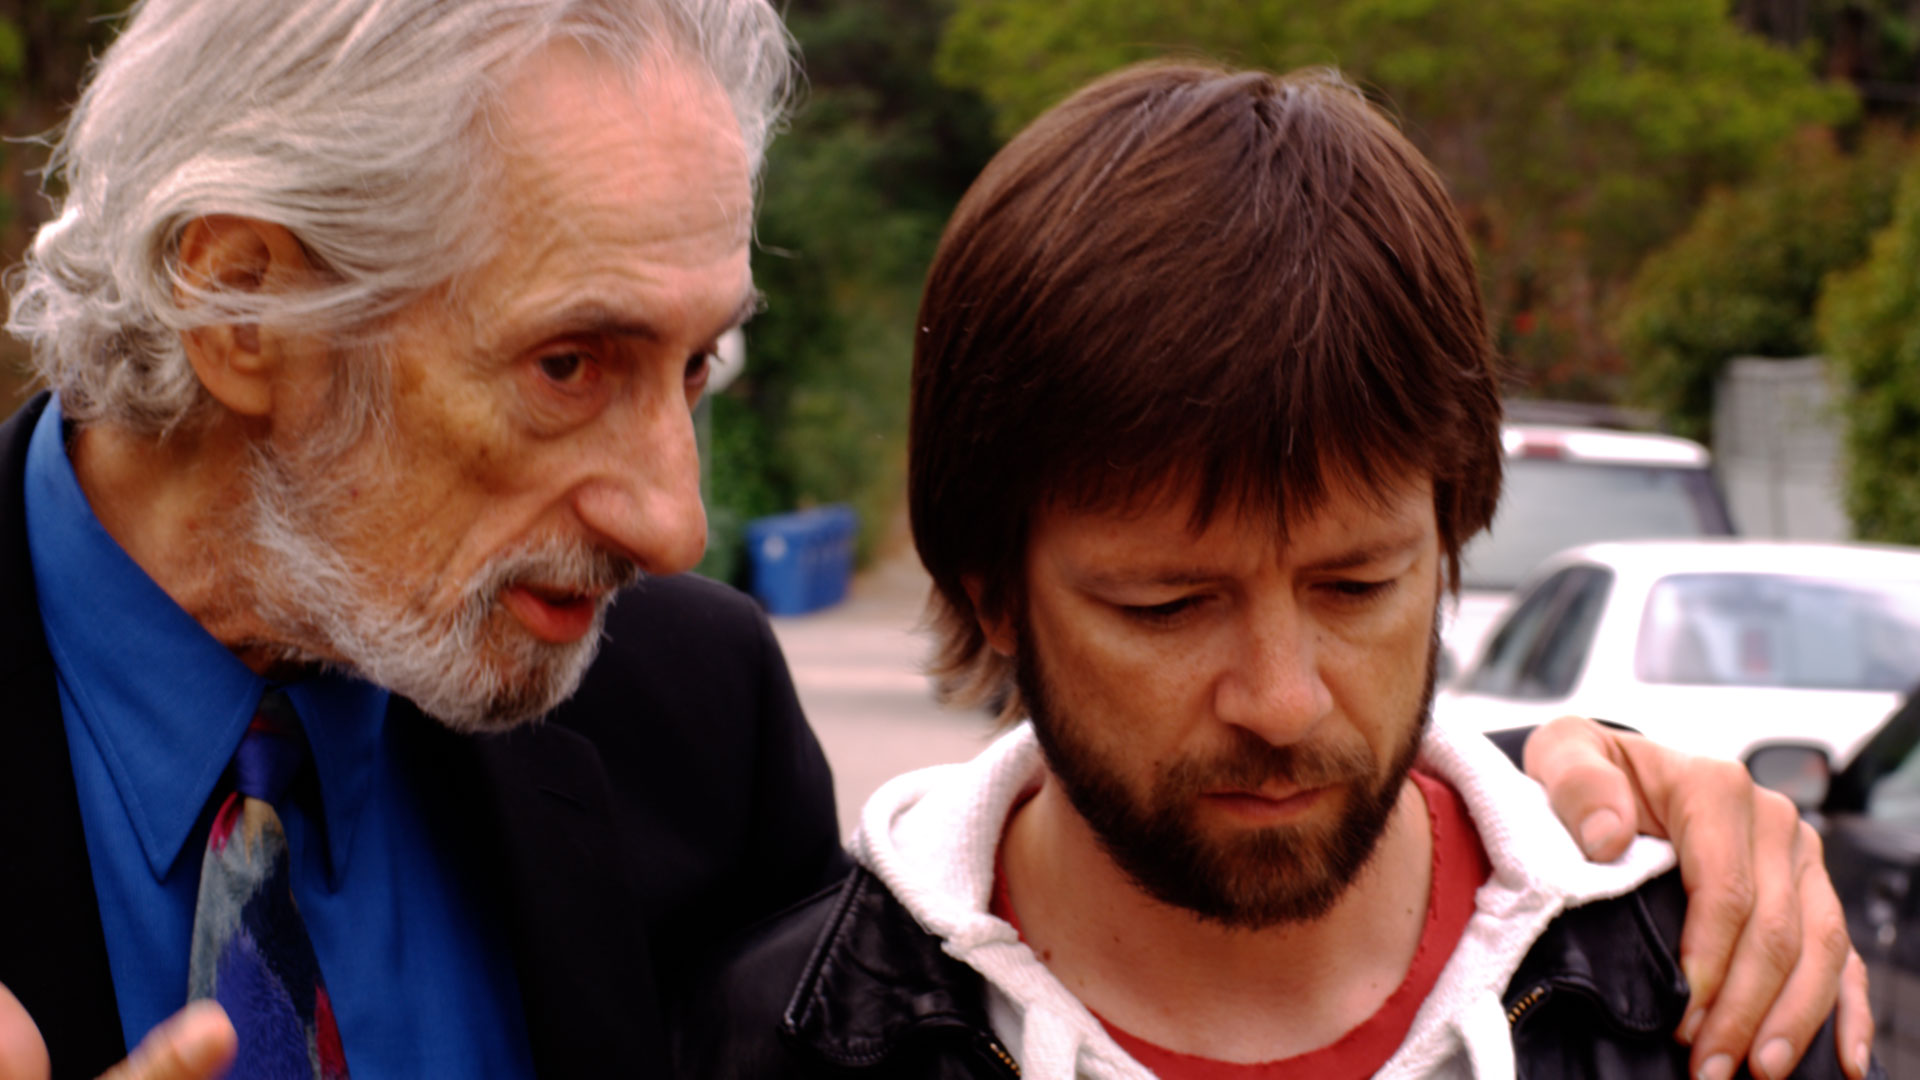 with Larry Hankin in The Last Hand